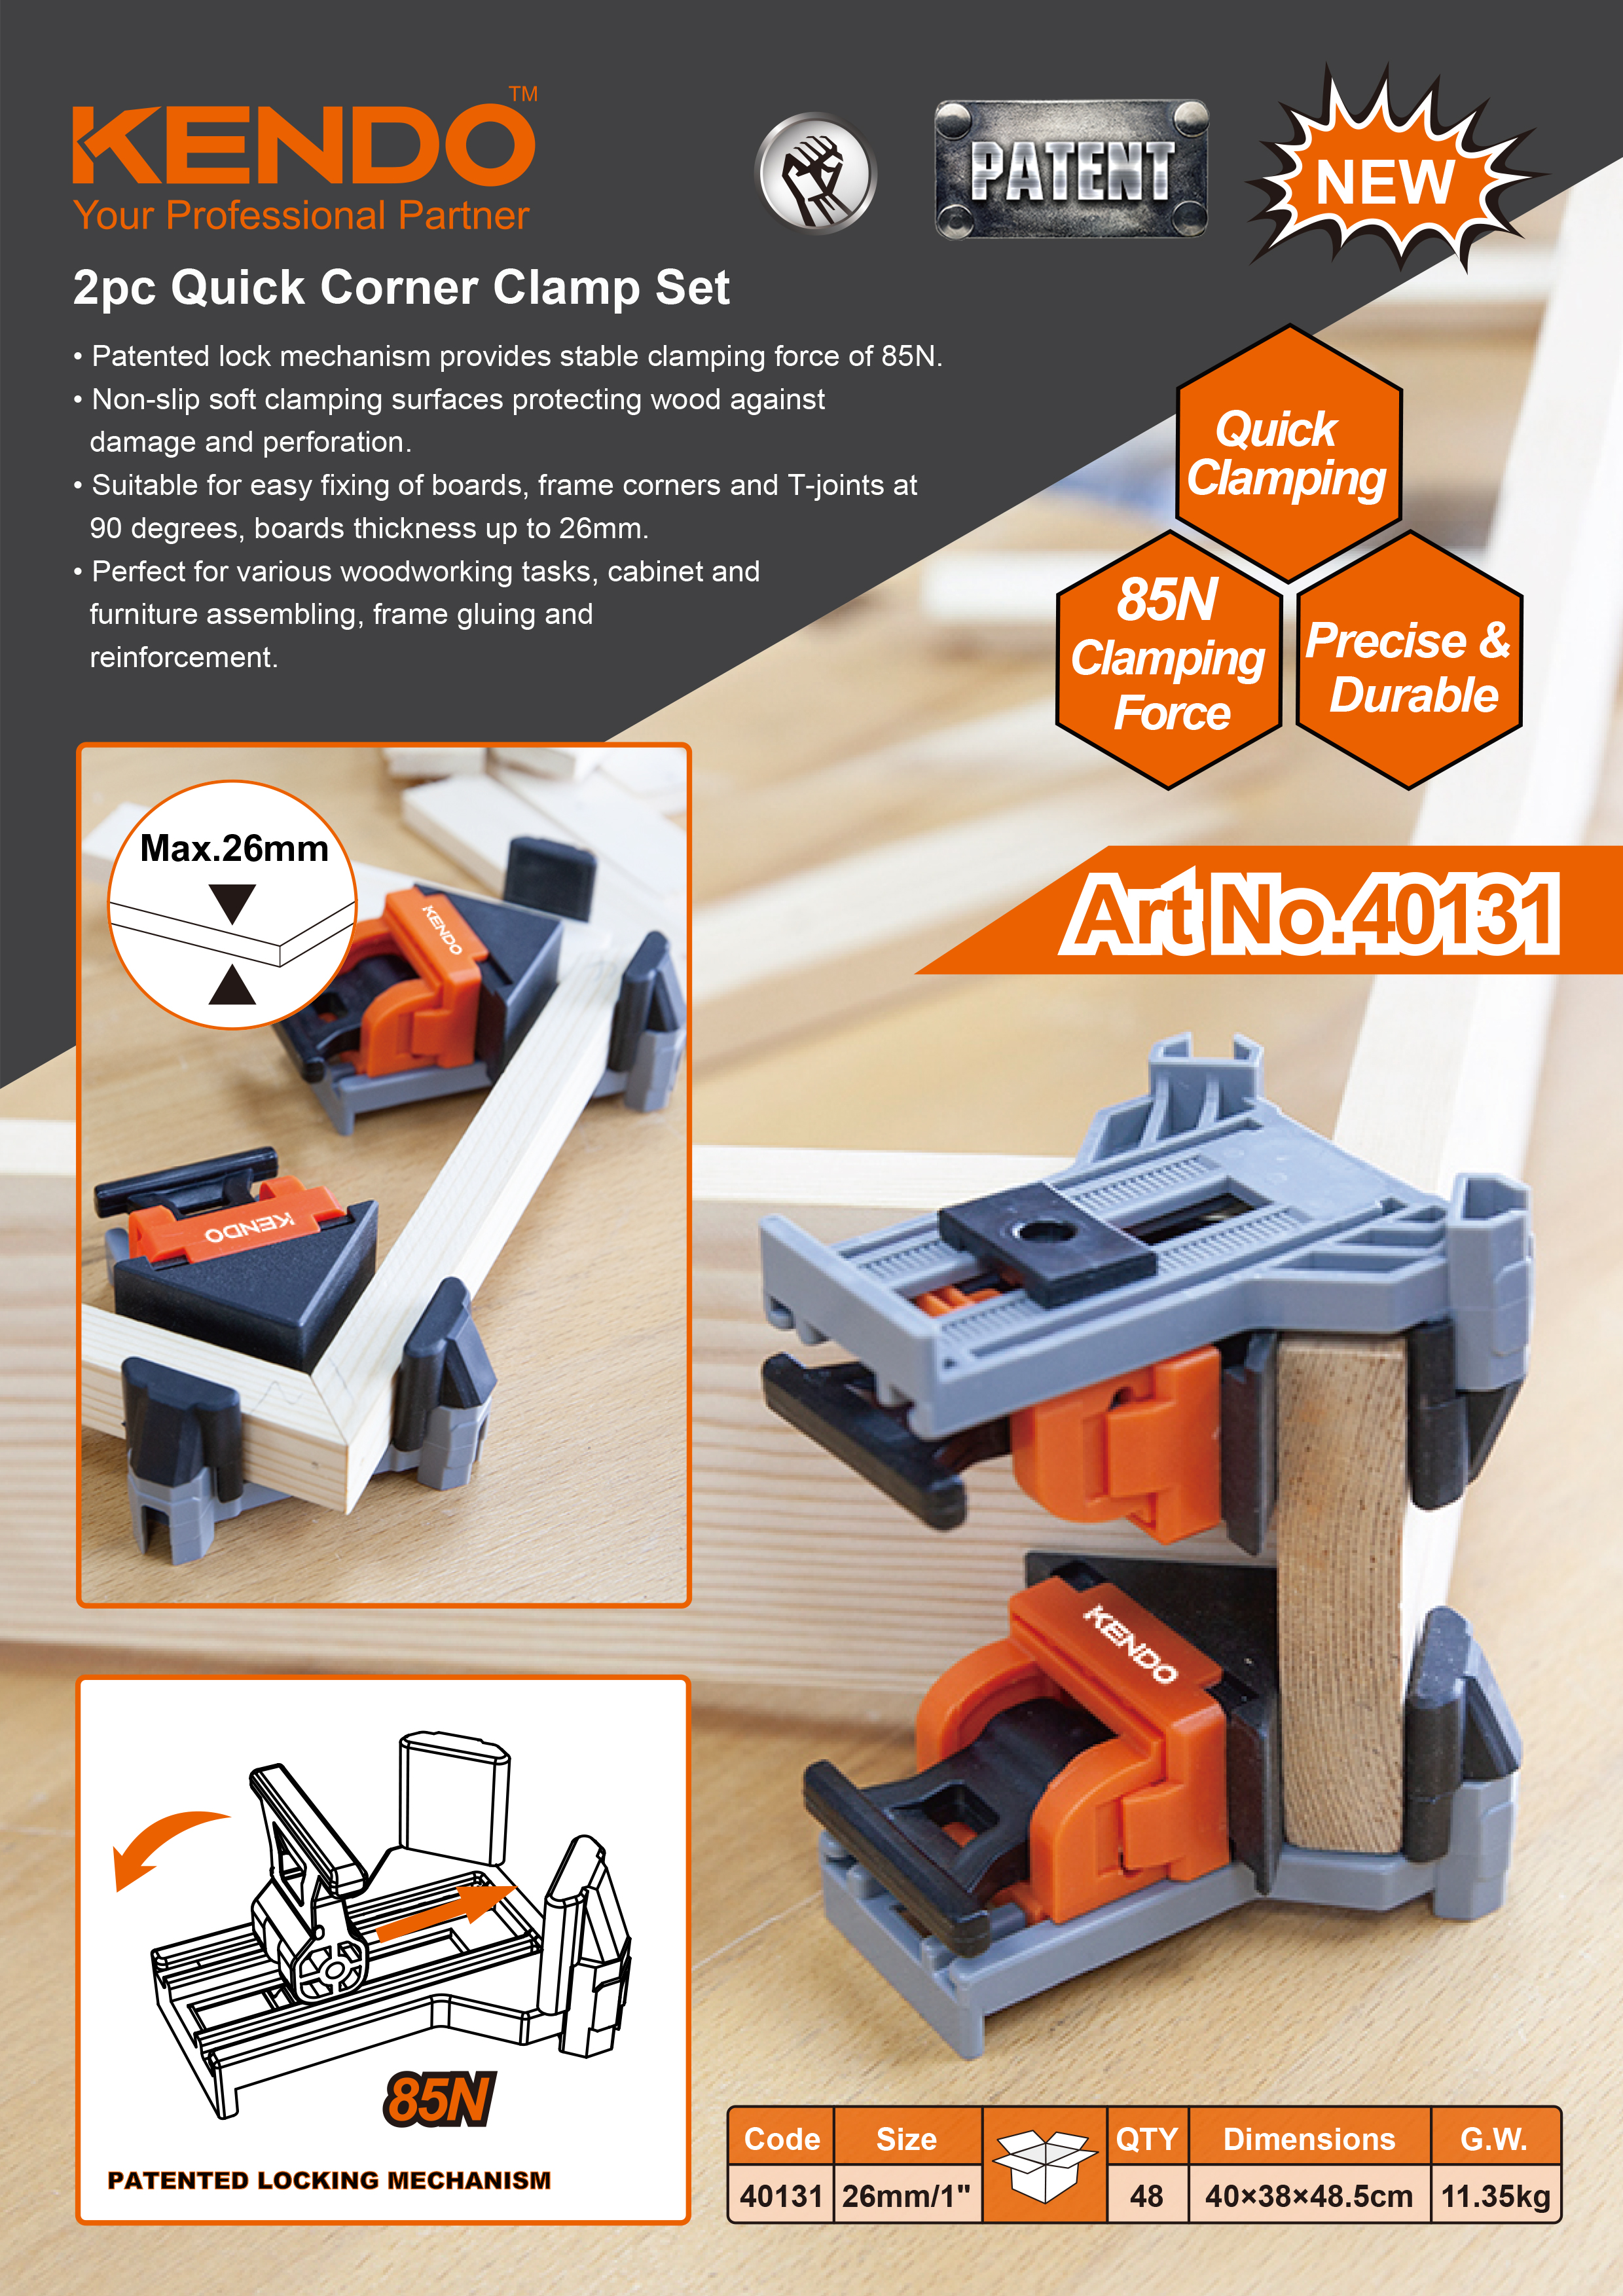 What are the features of the 6 Drawer Cabinet Tool Set?